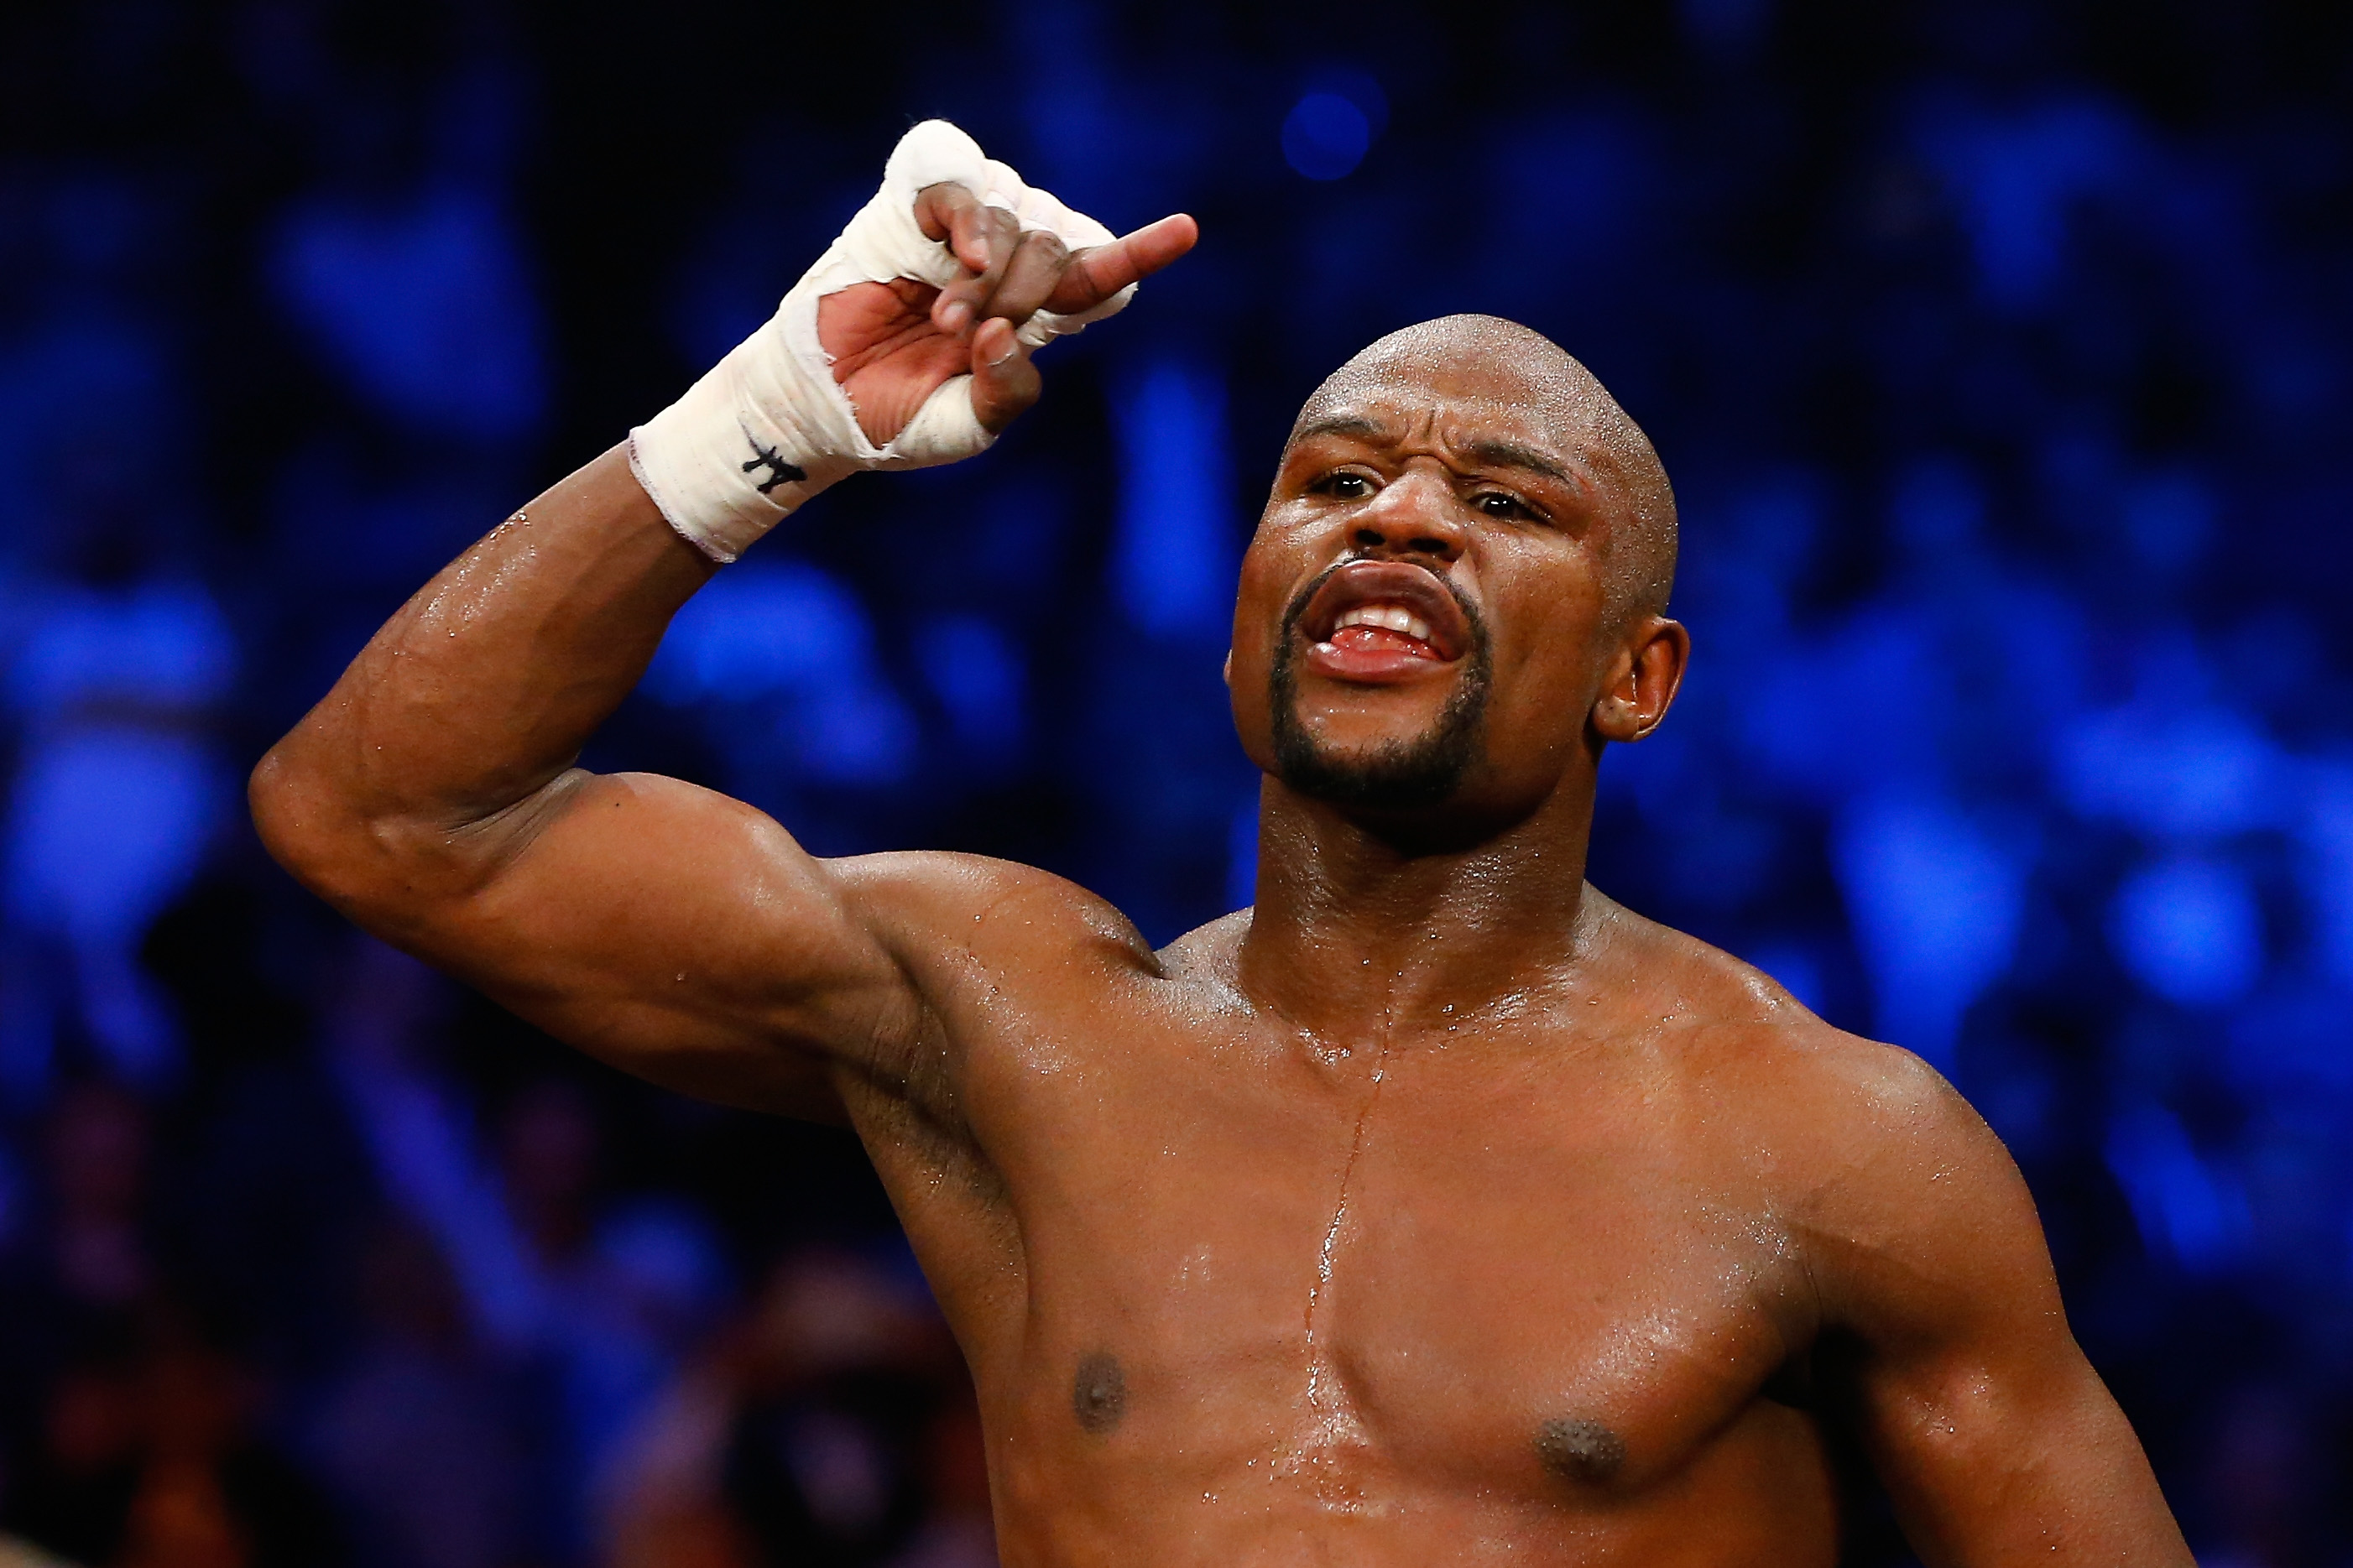 How to watch Floyd Mayweather vs